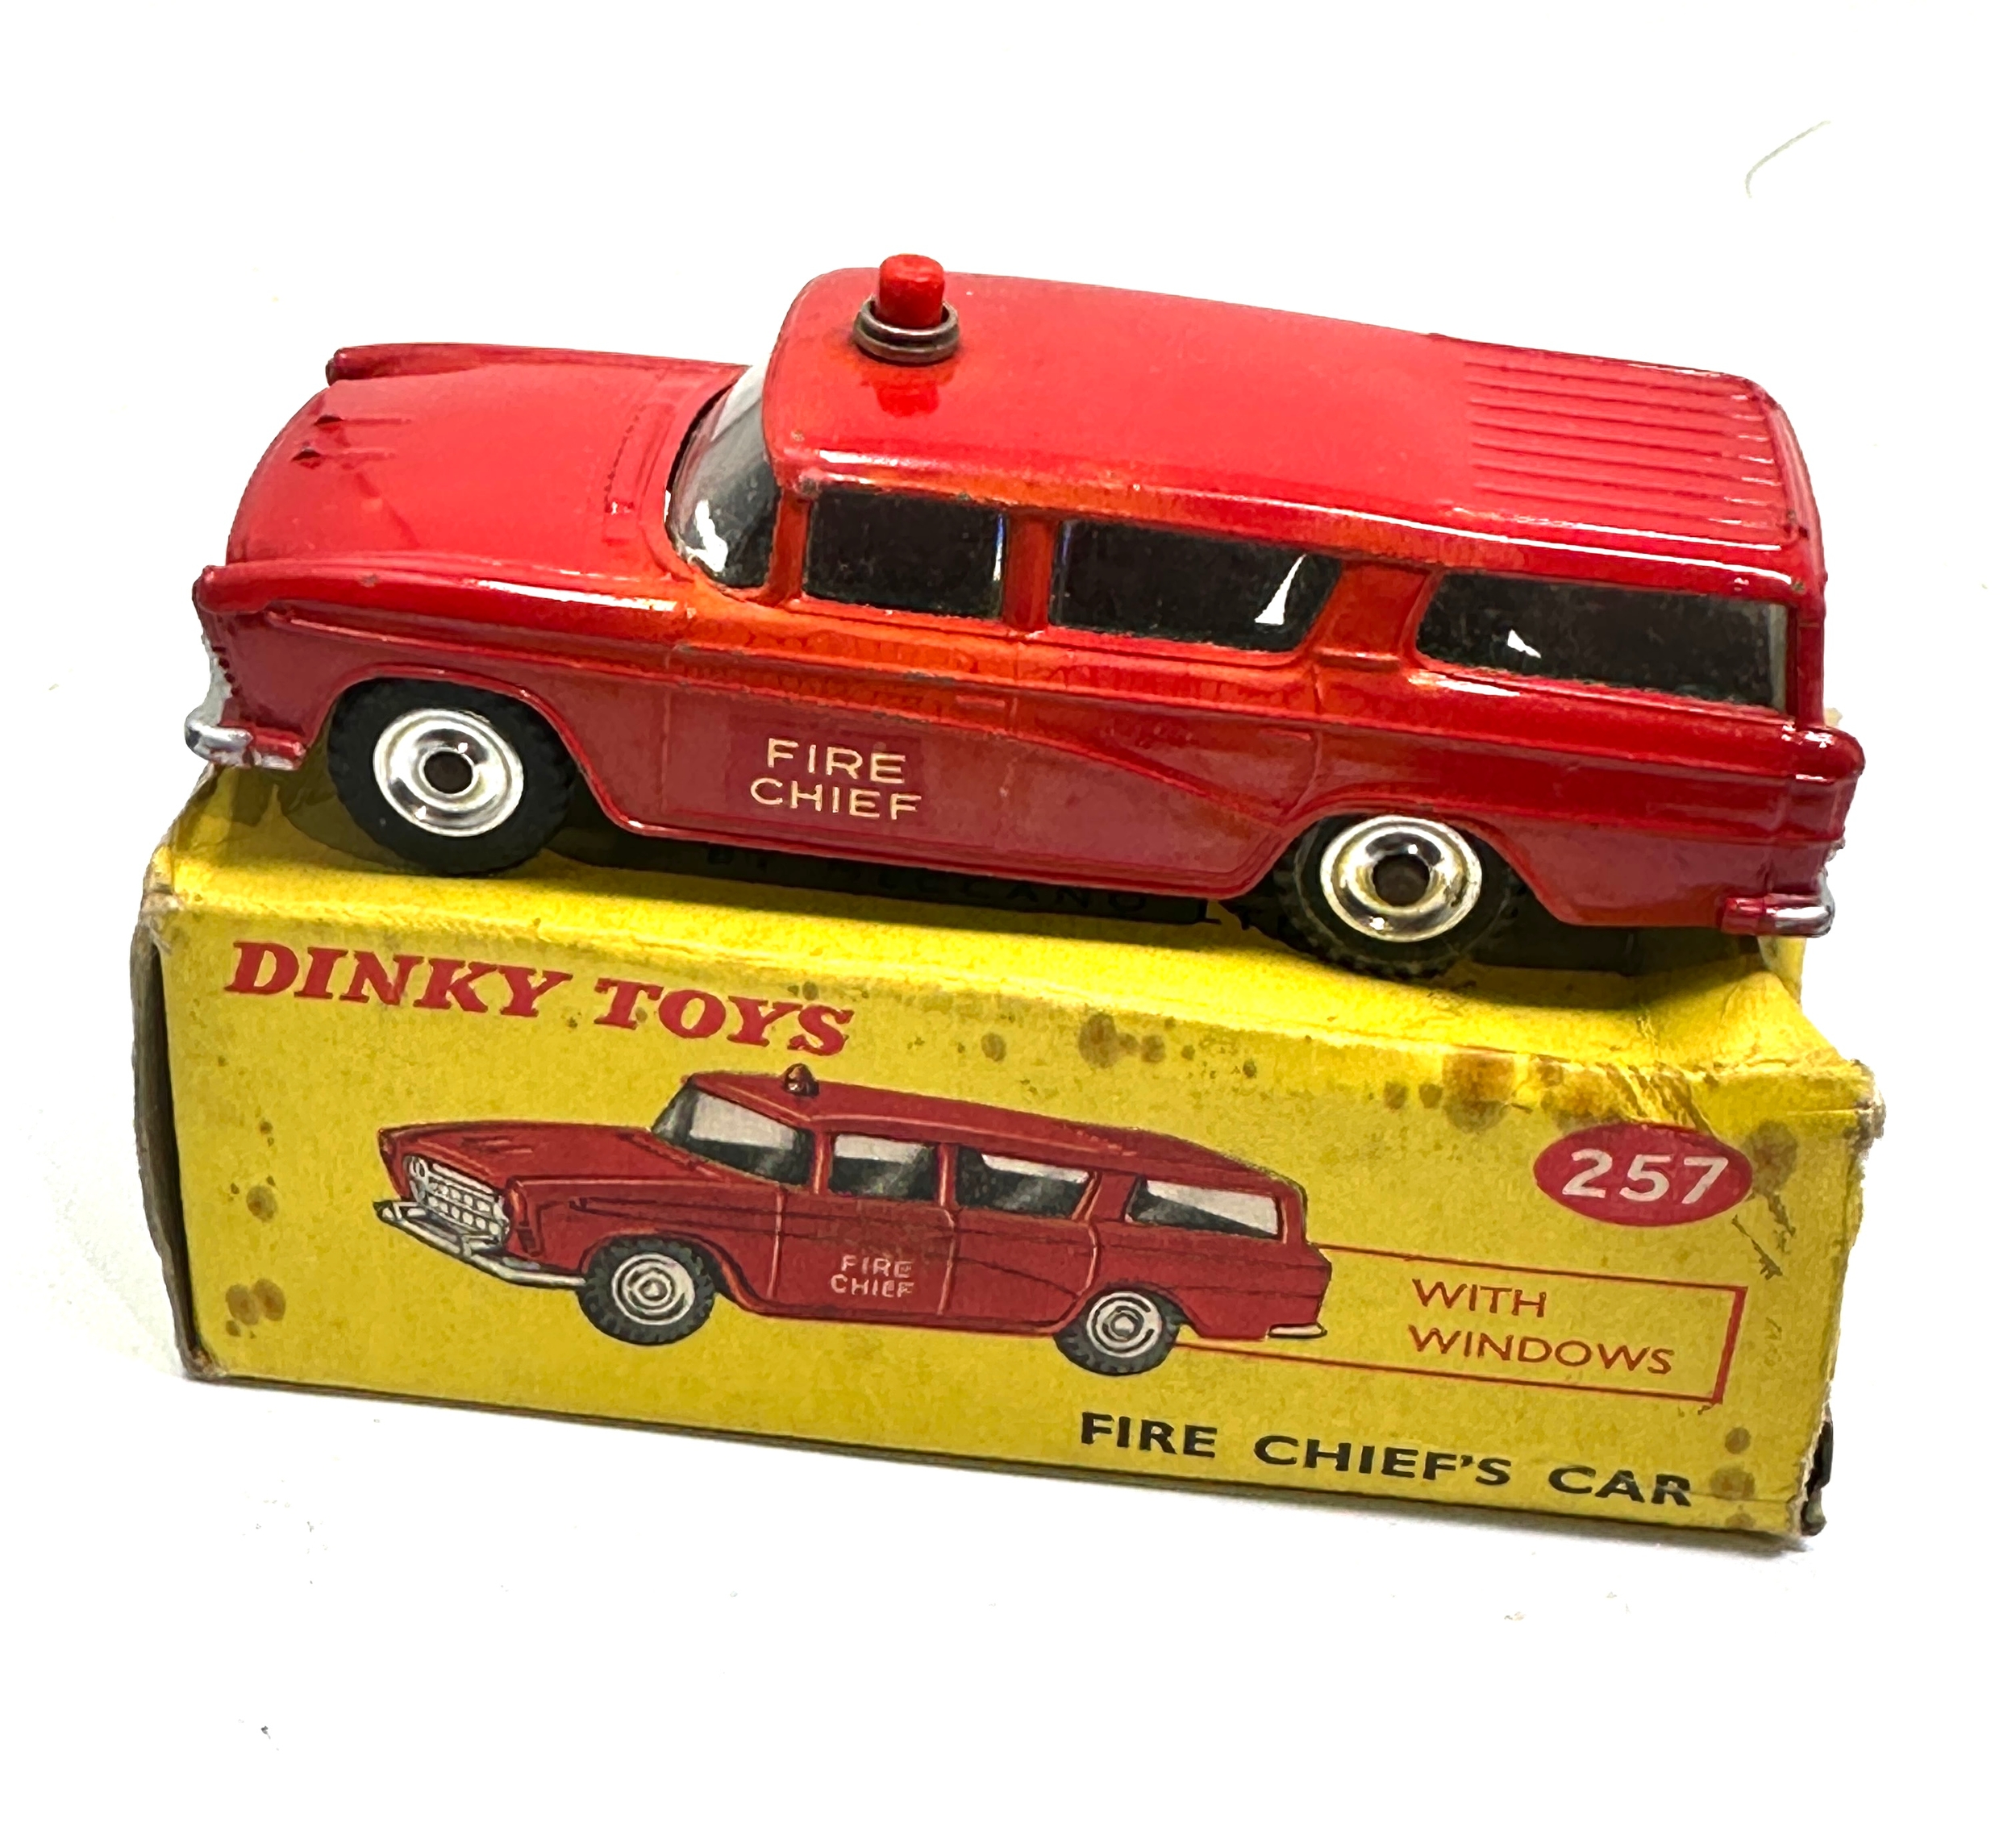 DINKY TOYS 257 Fire Chief’s Car Boxed